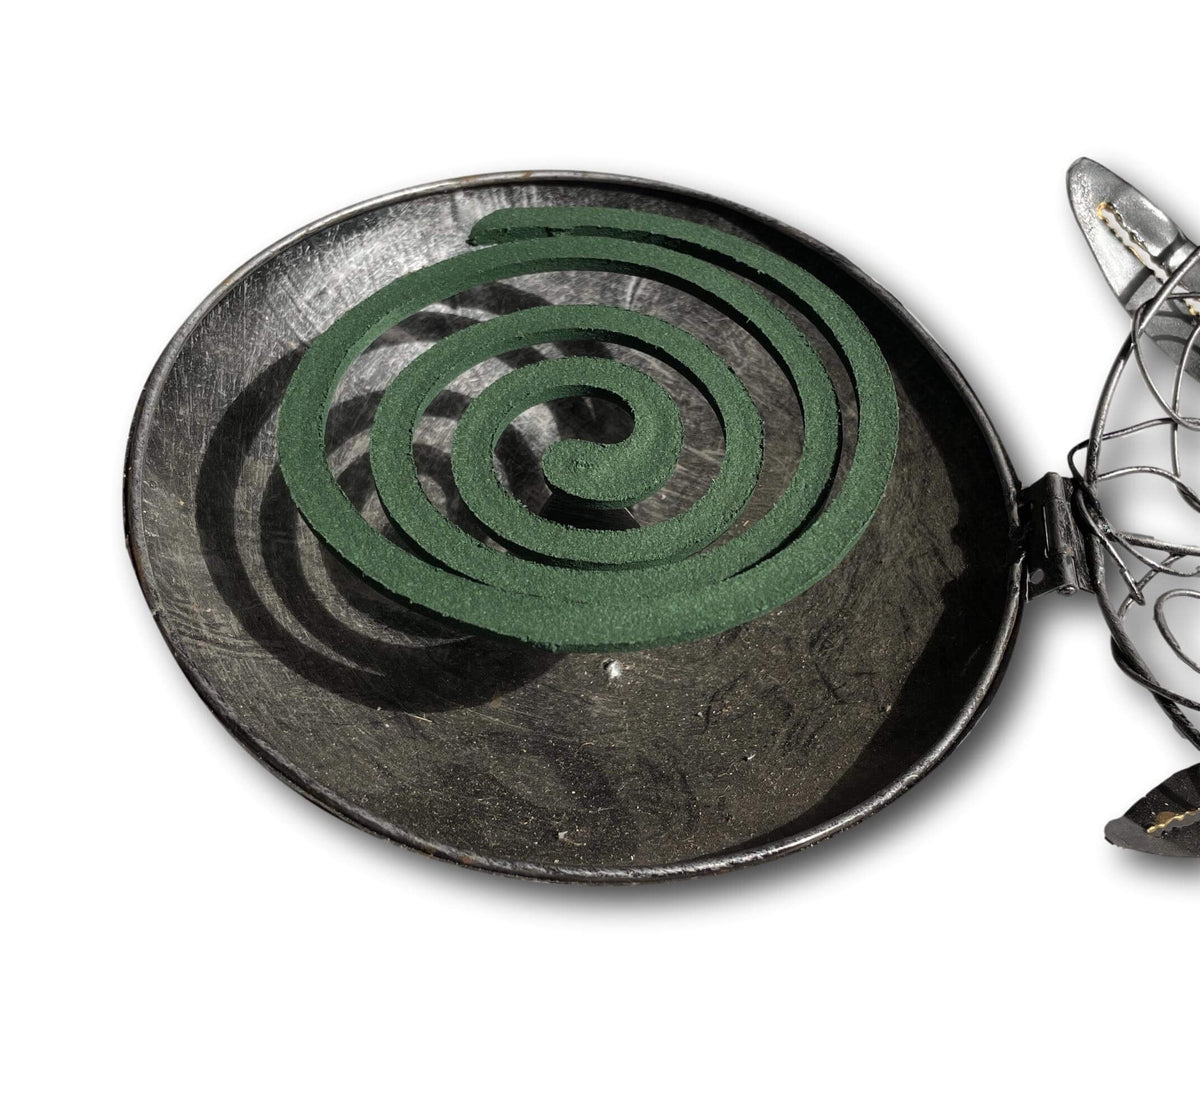 DUCK MOSQUITO COIL HOLDER IN SILVER &amp; WHITE - HANDMADE BALI METAL ART + SINGING BOWLS AND MEDITATION